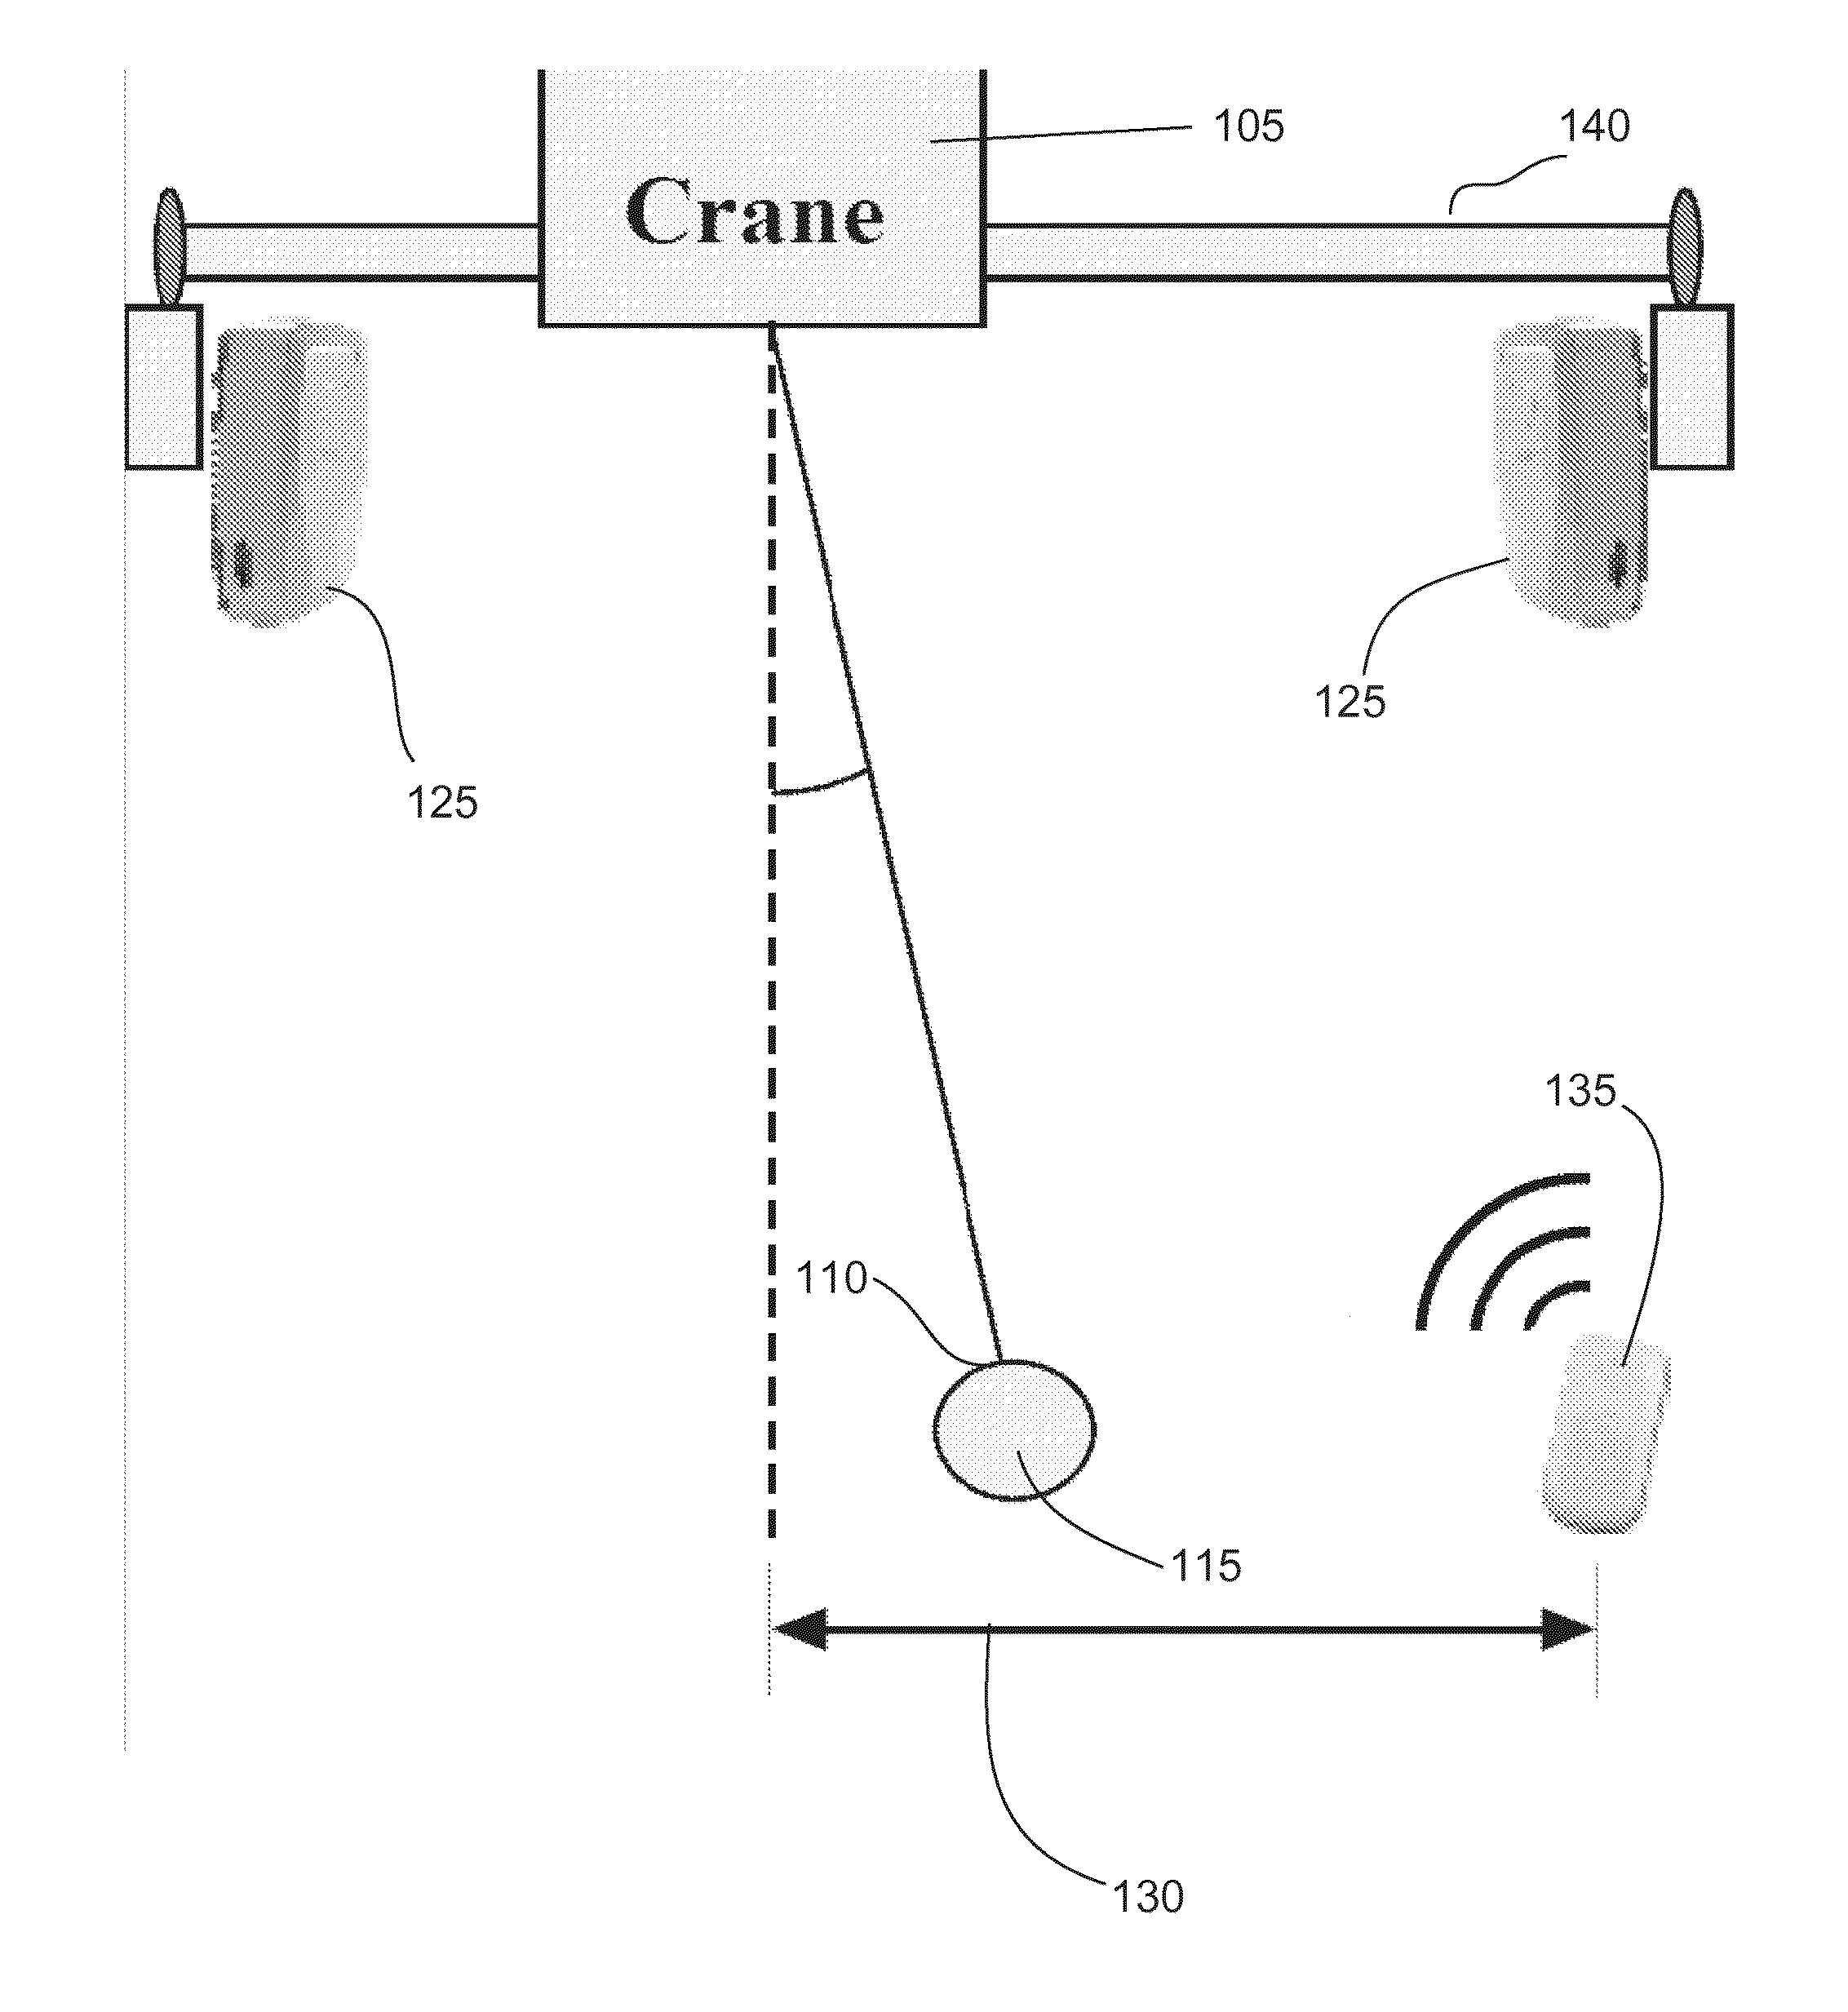 Crane control systems and methods